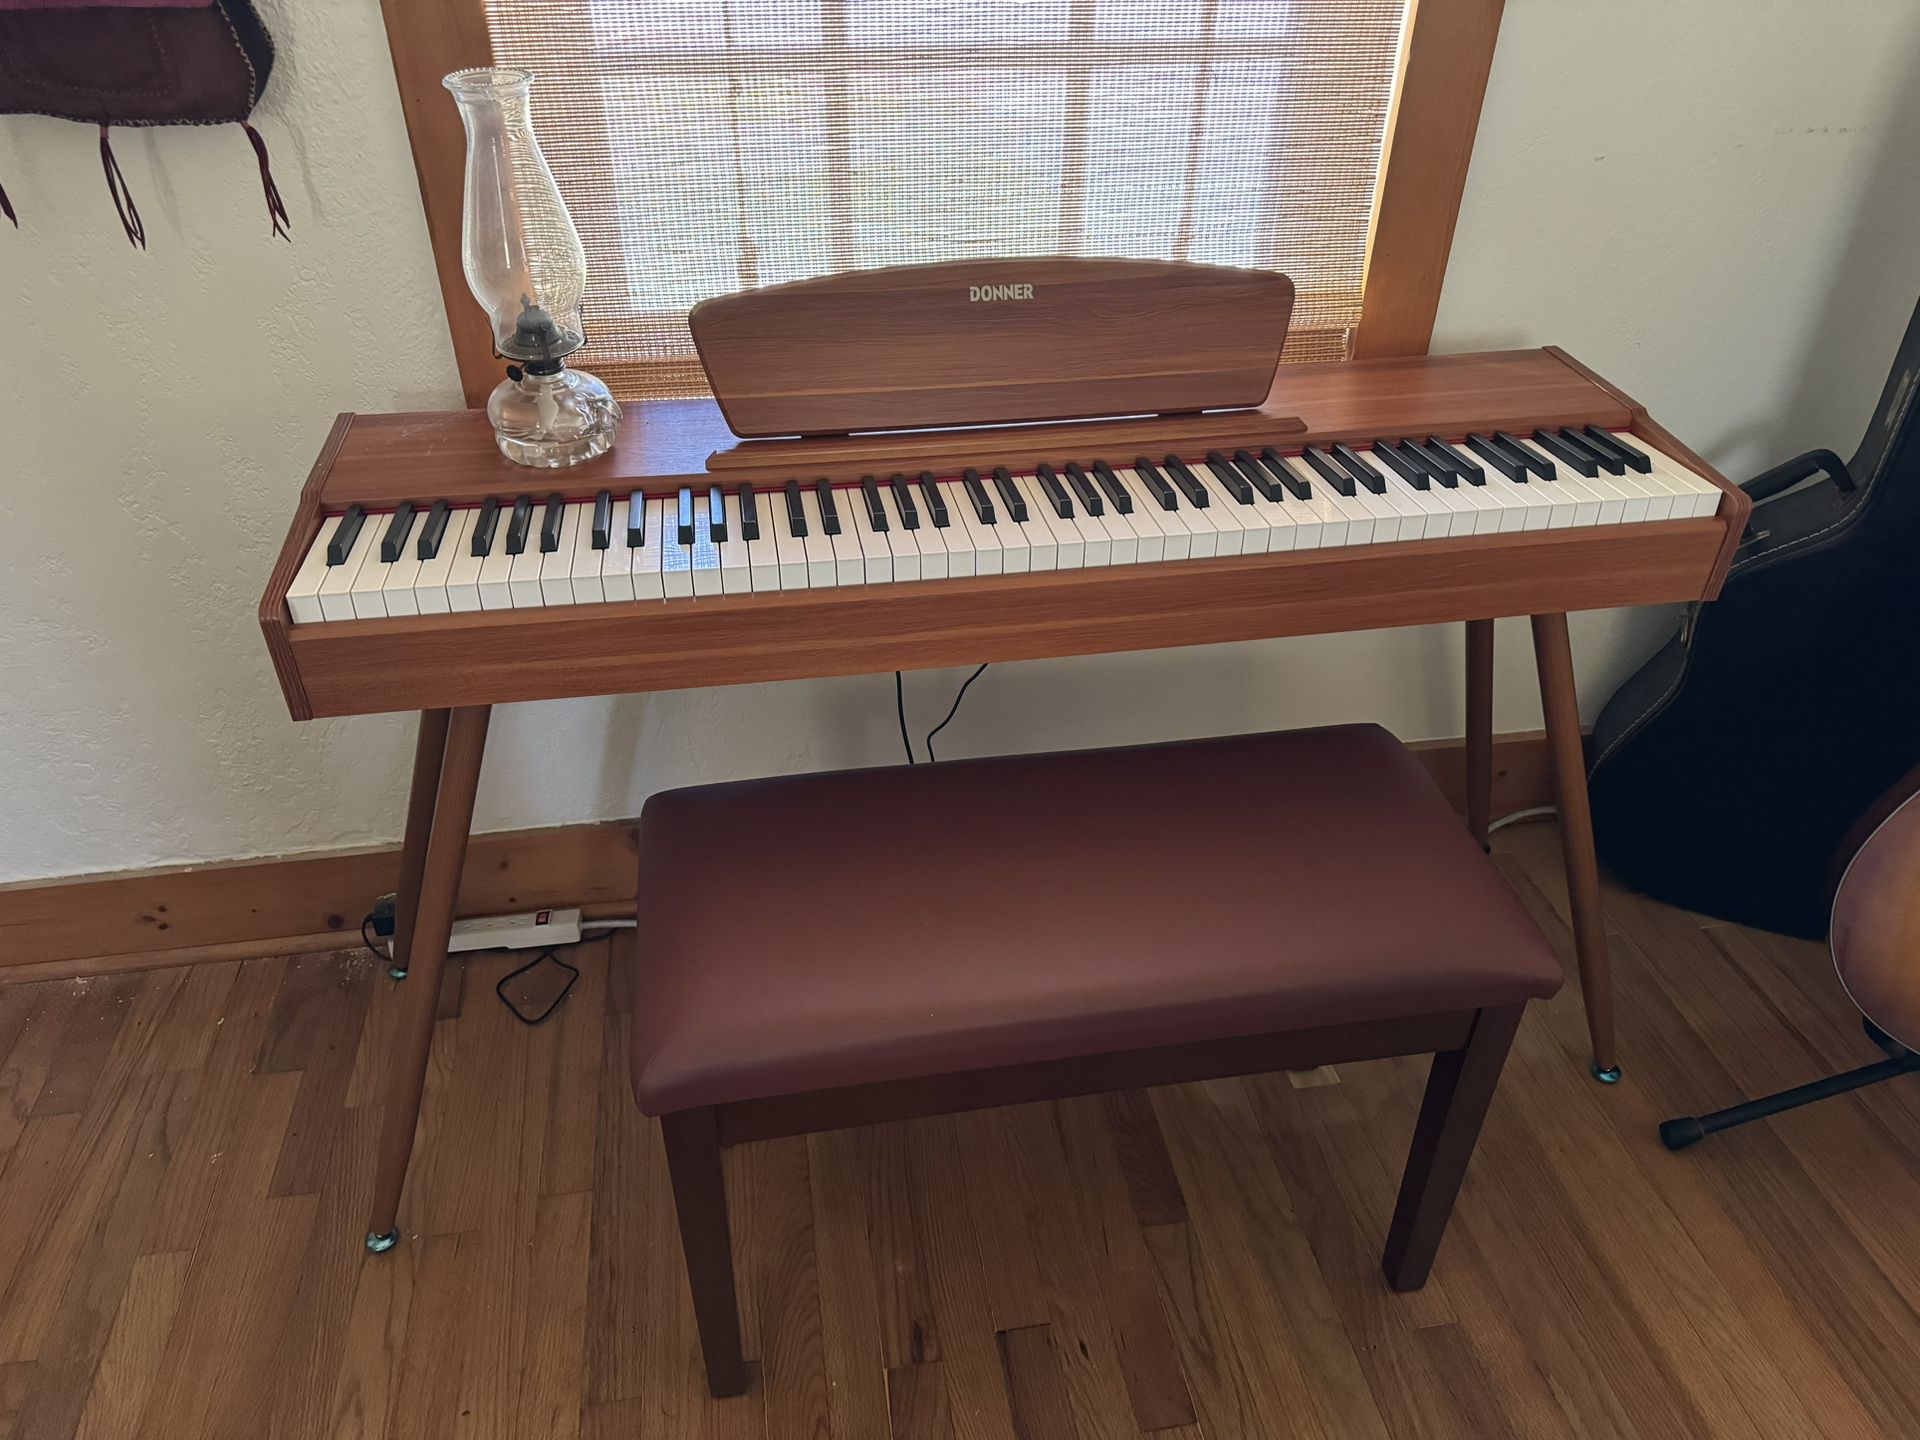 Donner DDP80 Digital Piano 88 Key with Bench Seat